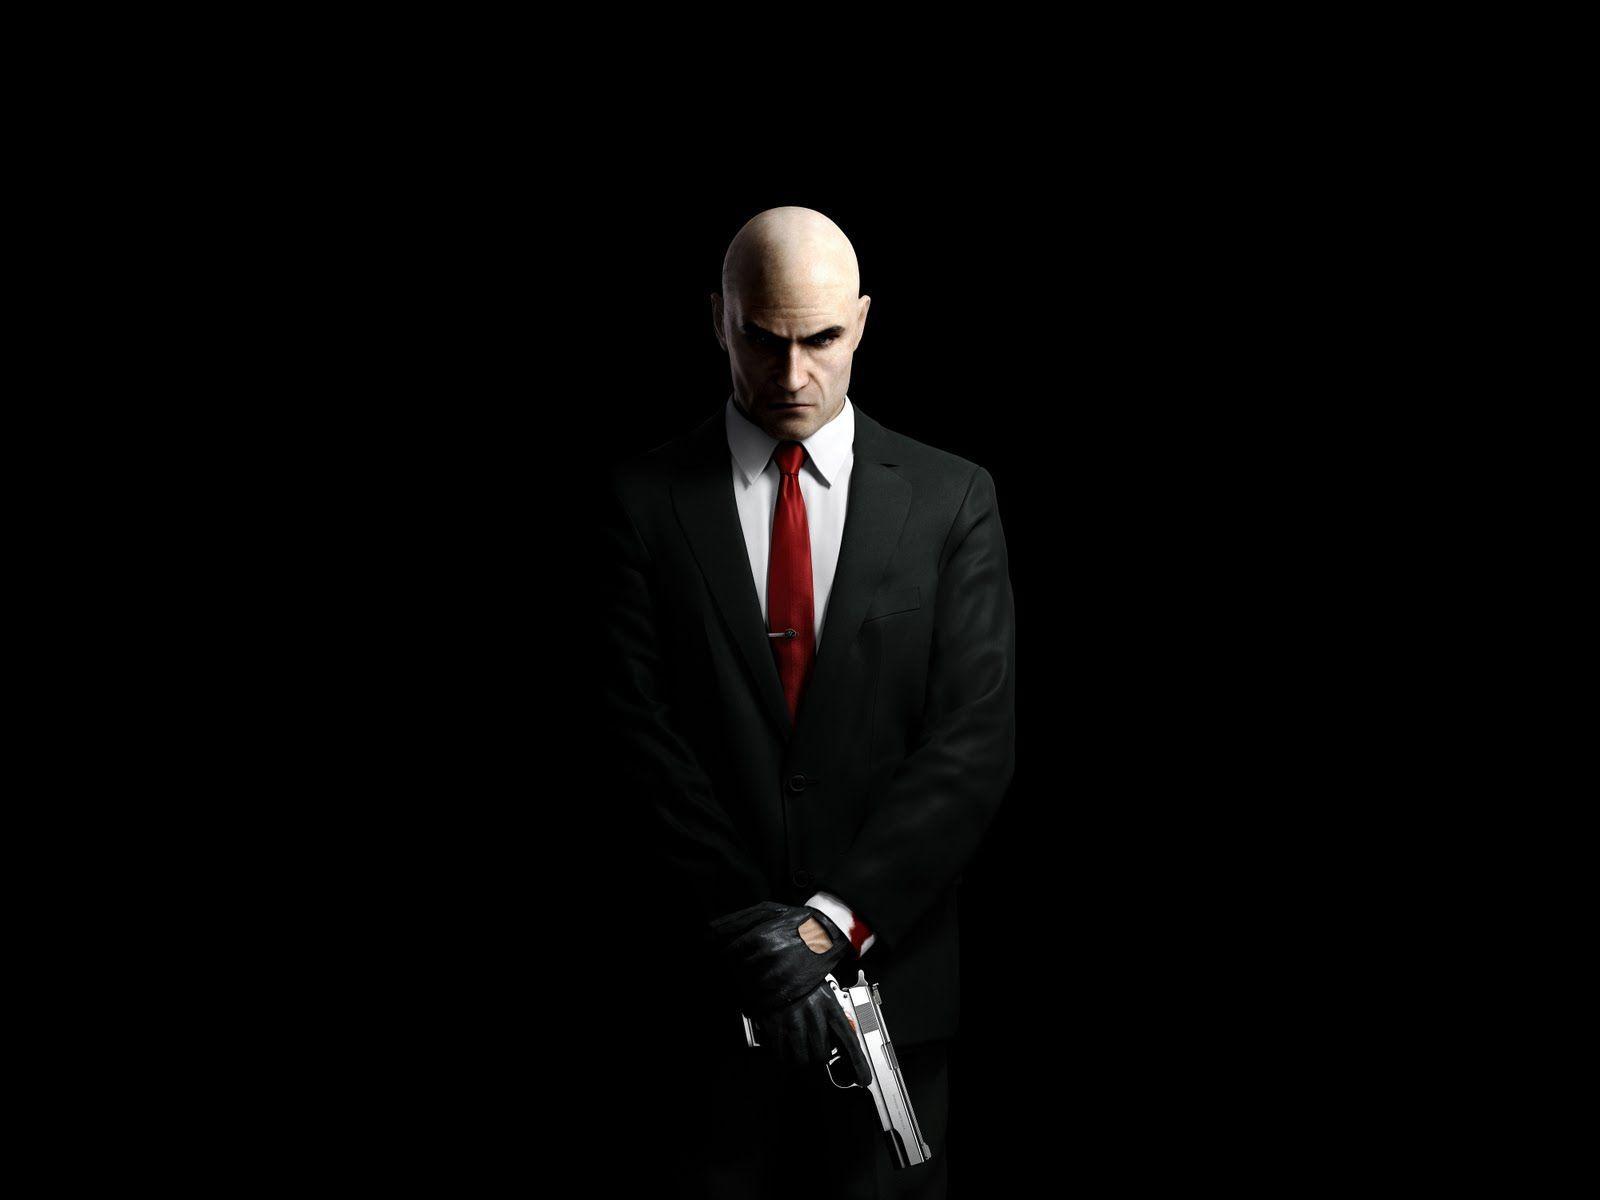 Hitman Absolution Game HD Wallpapers Download Free Wallpapers in